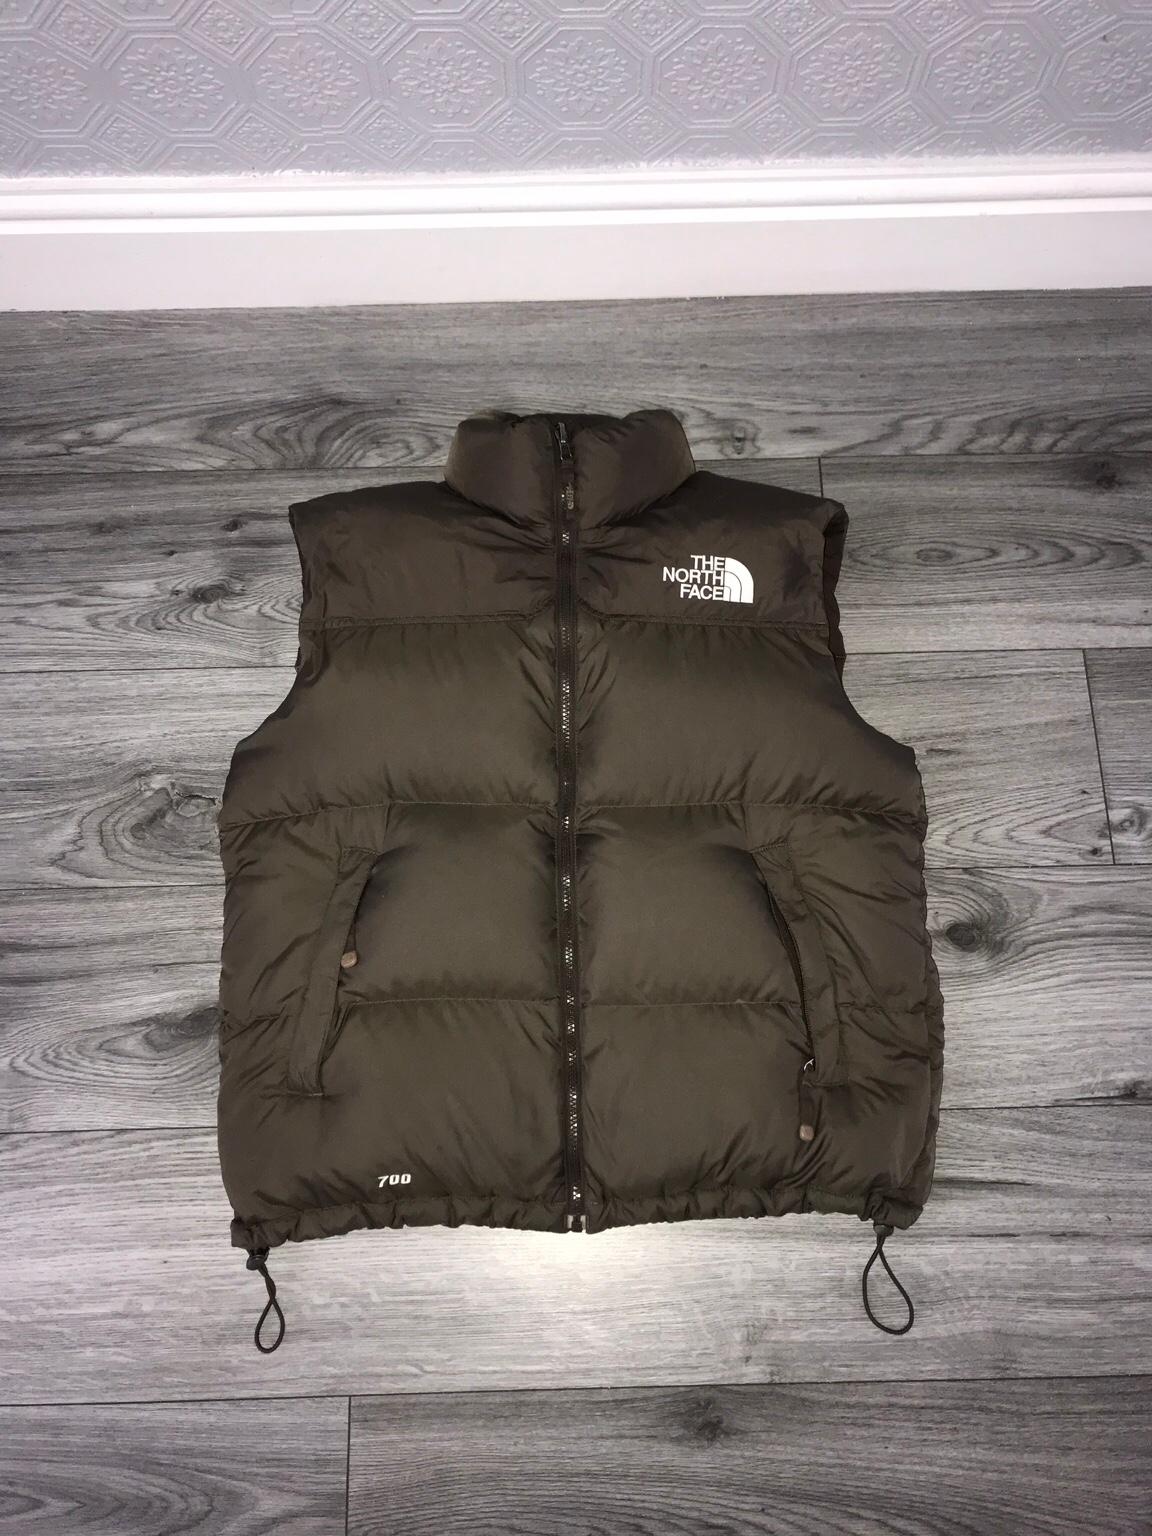 The North Face Brown 700 Down Puffer Gilet In Wv14 Wolverhampton For 50 00 For Sale Shpock